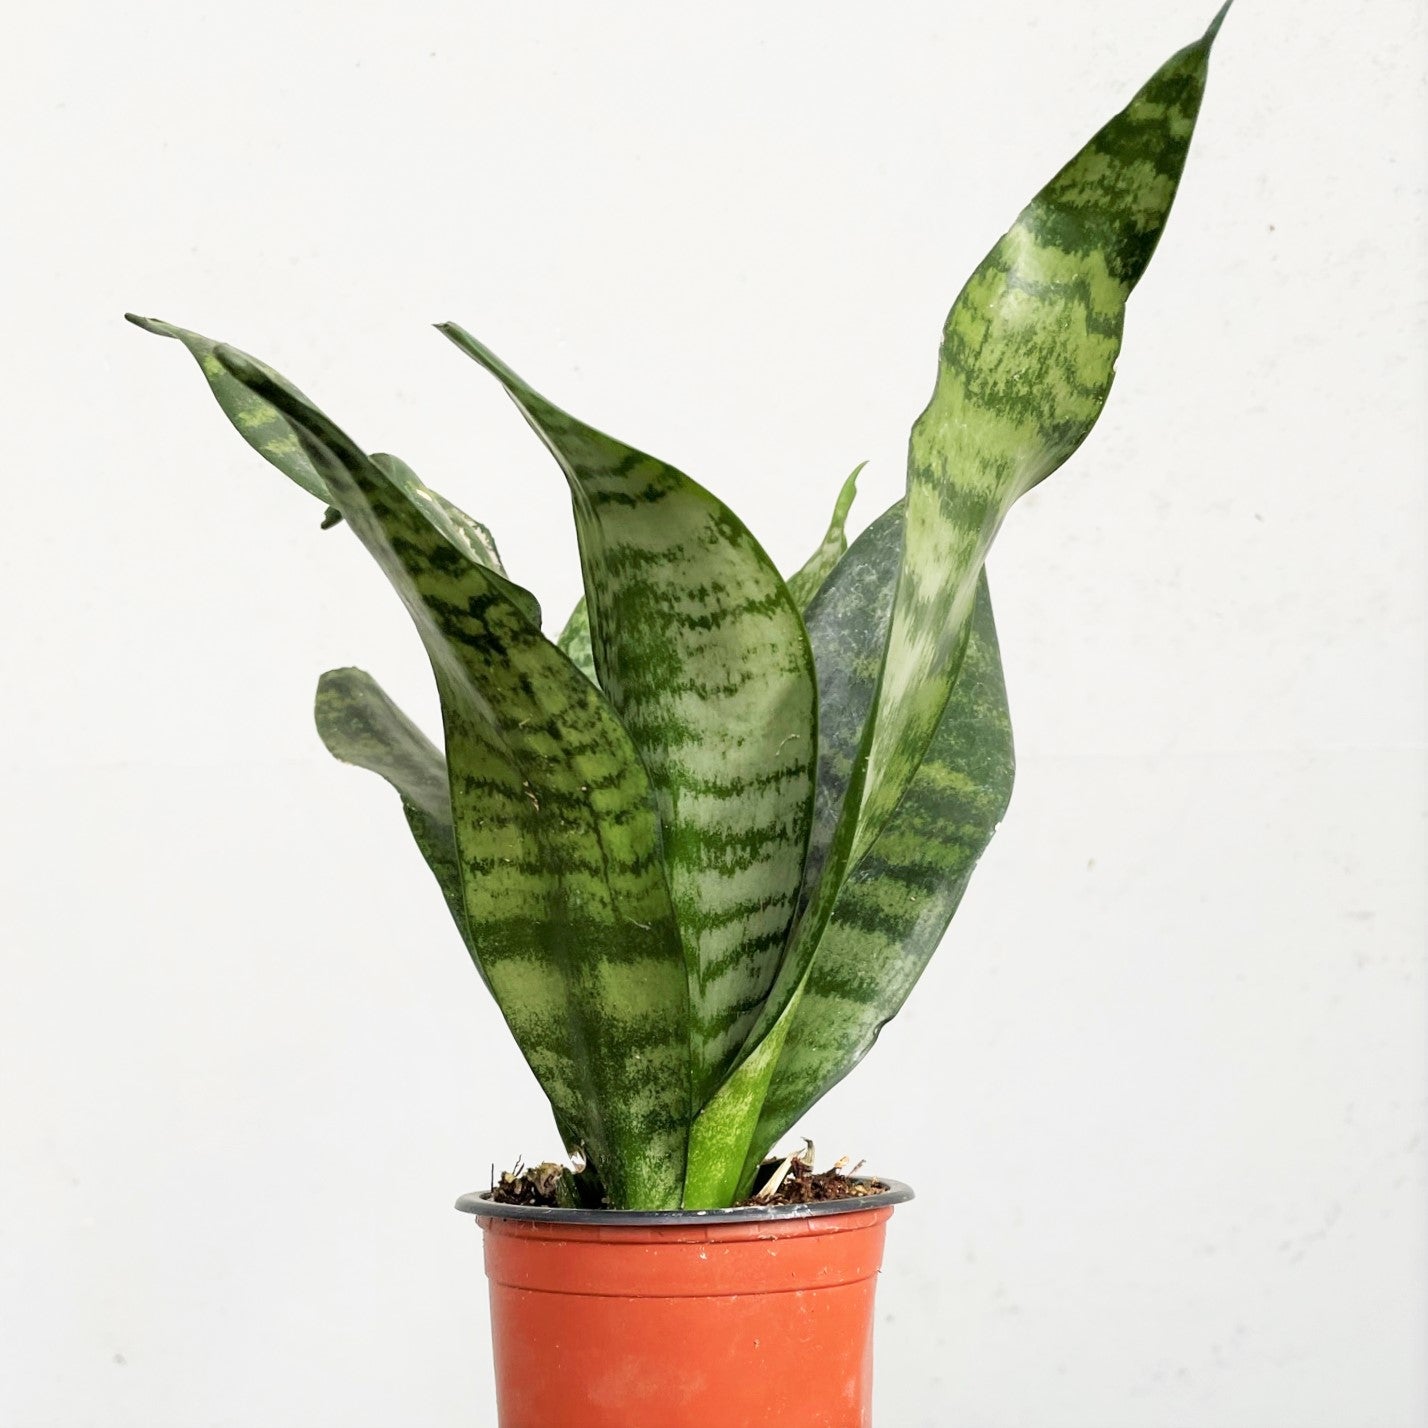 Sansevieria trifasciata - Snake Plant, Mother-in-Law's Tongue